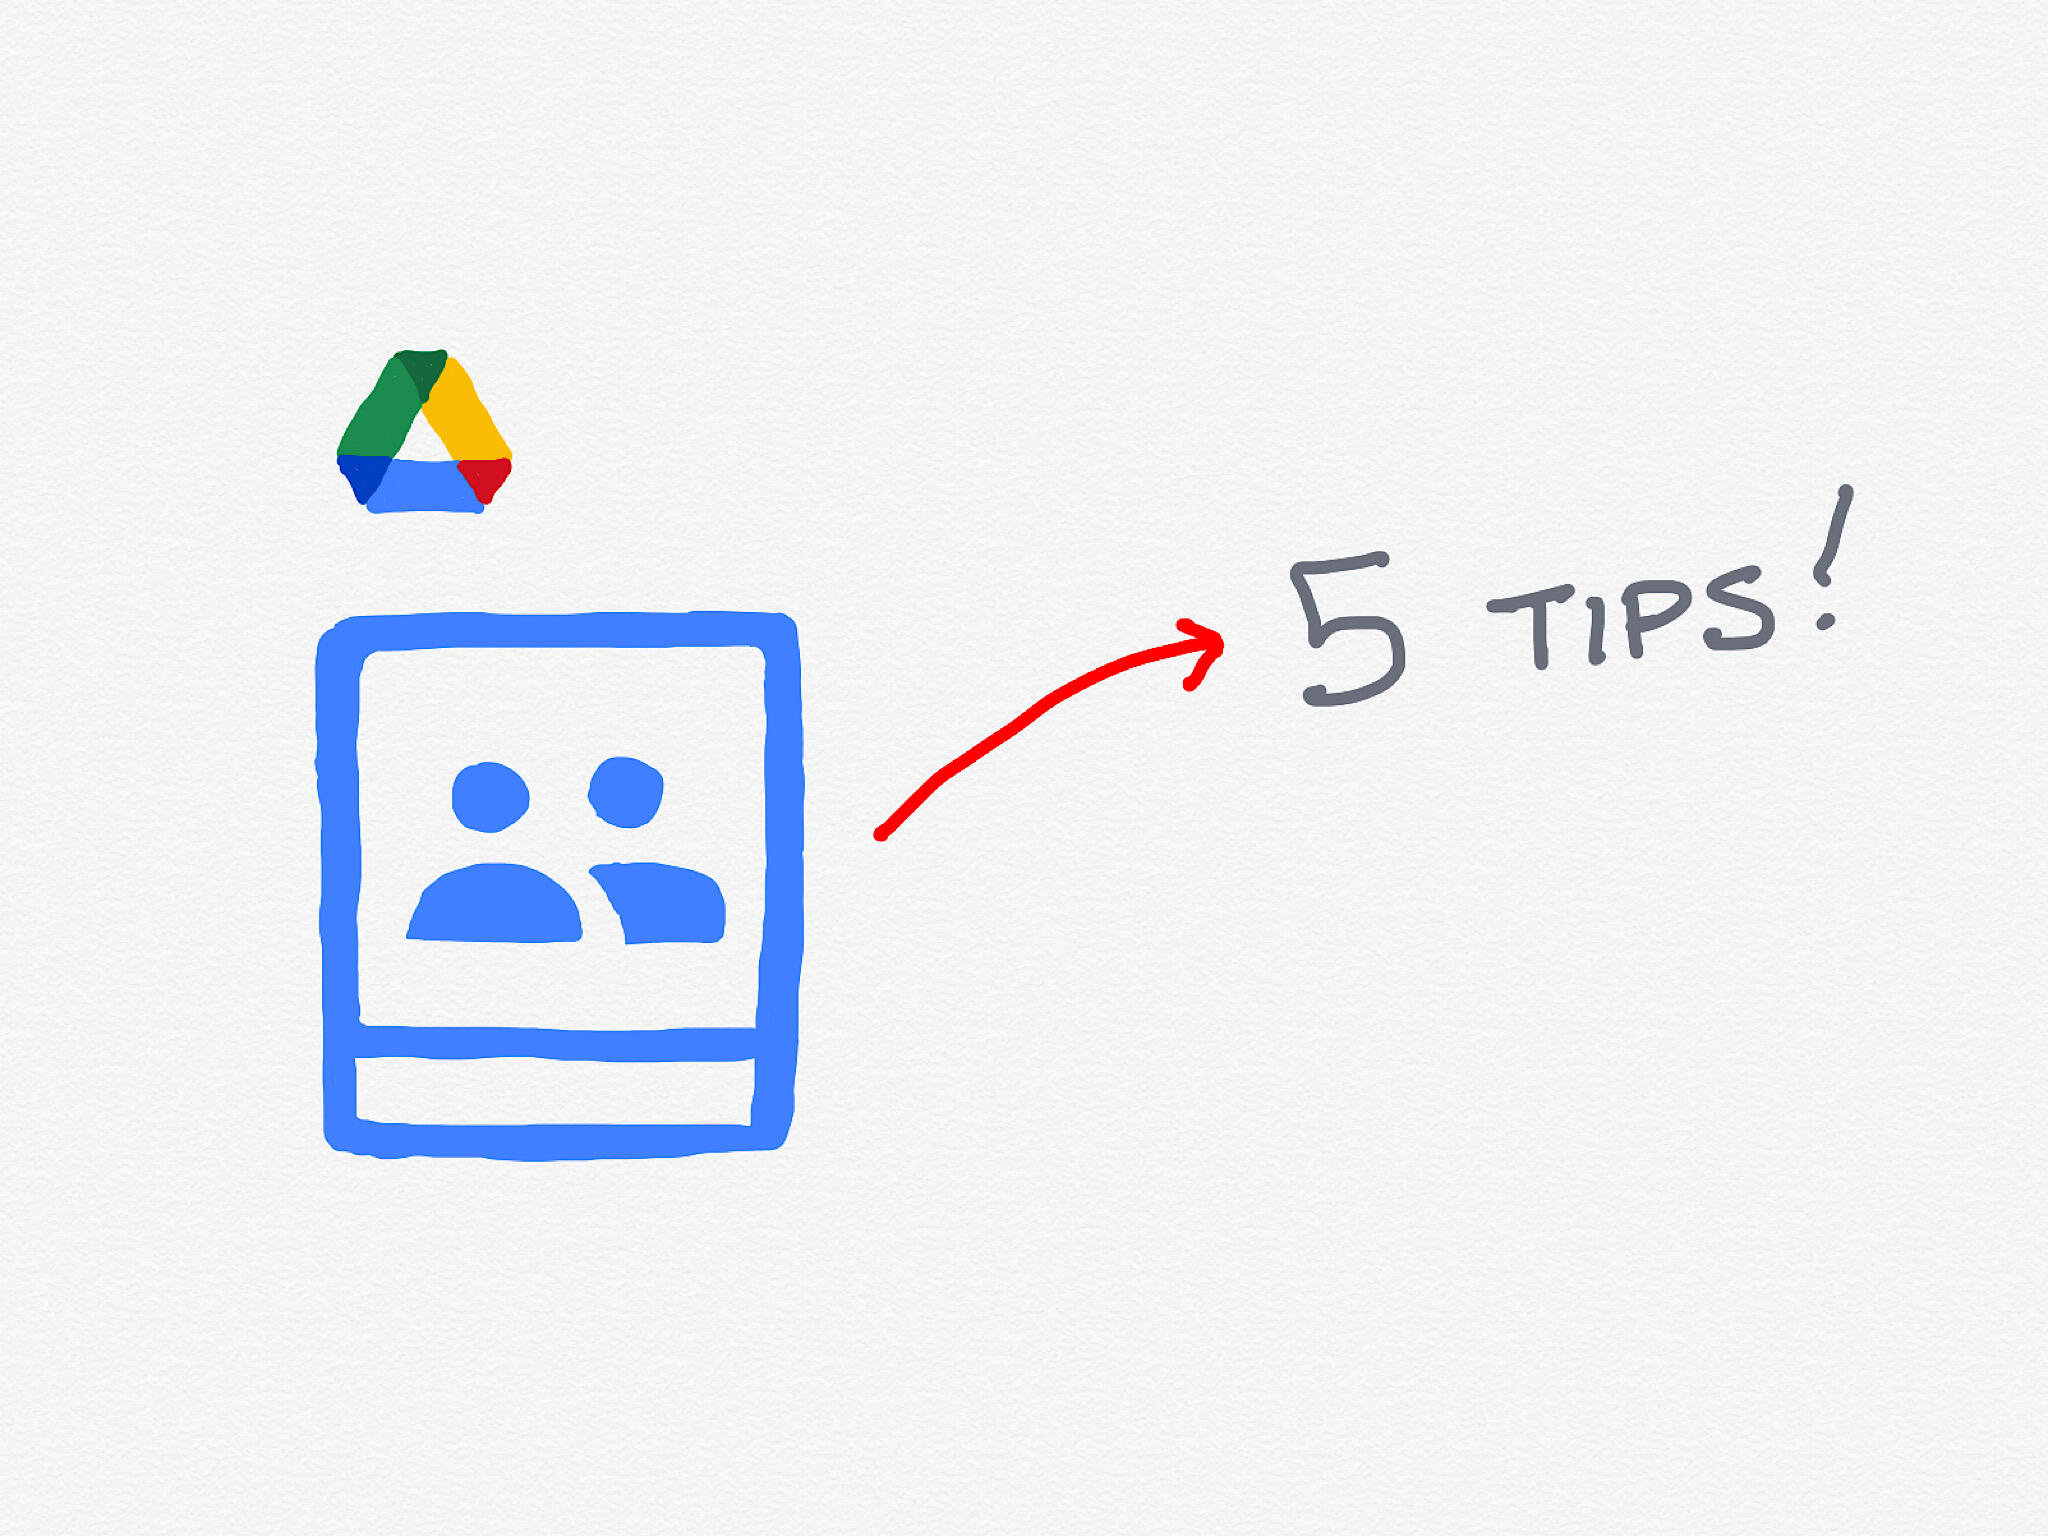 Hand drawn Google Drive logo, with large Shared drive icon below it with arrow from the icon to text: 5 Tips!